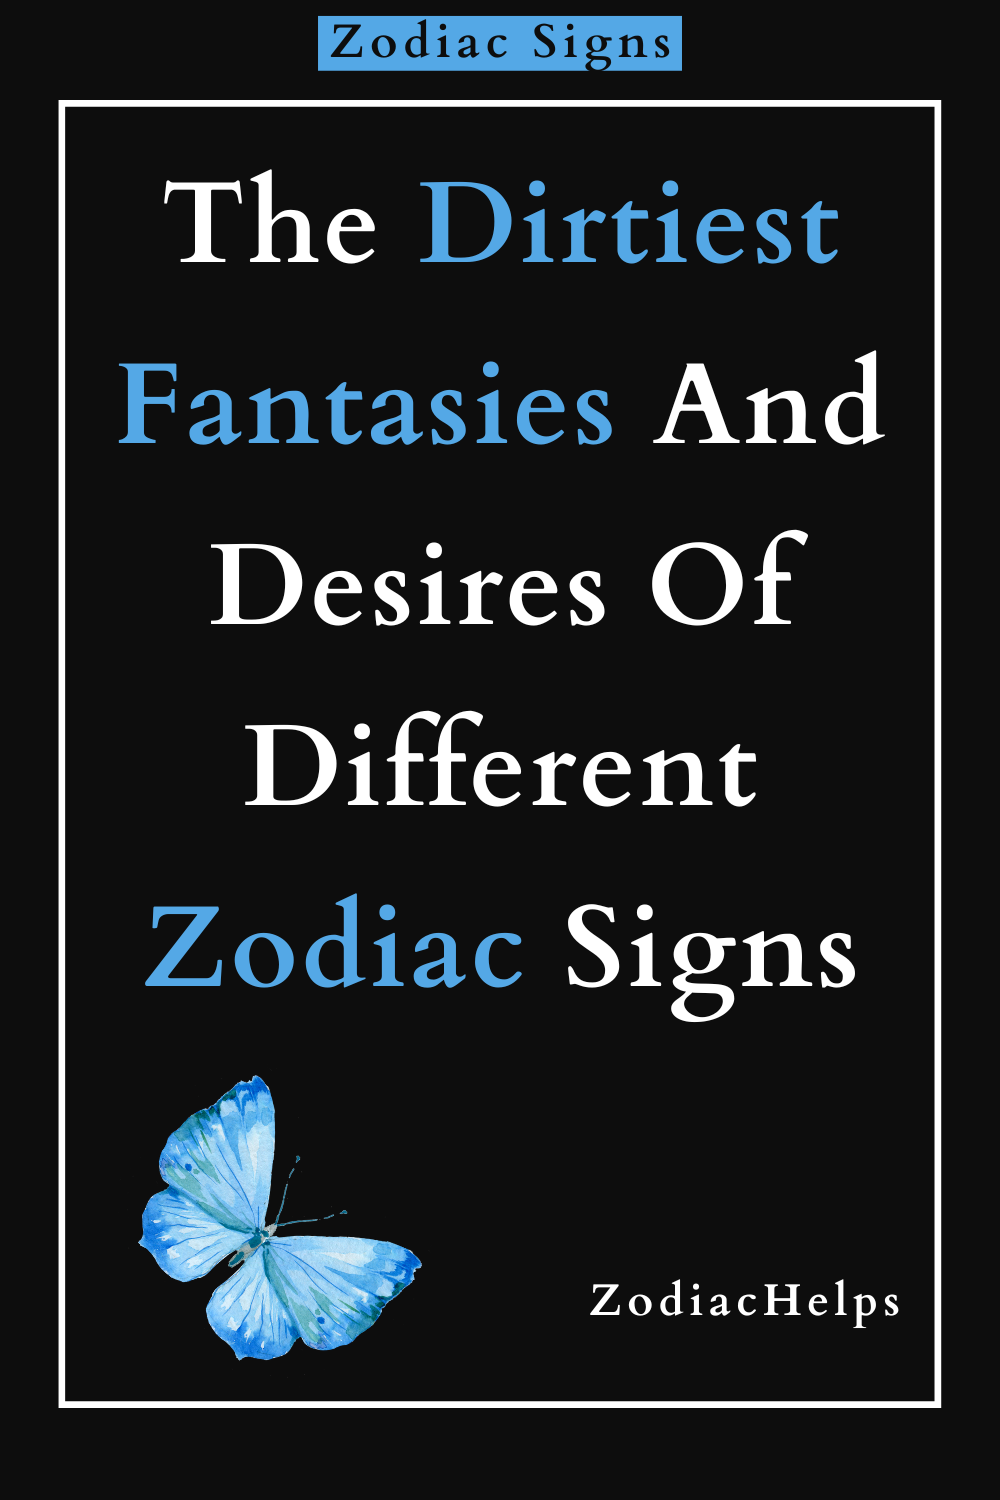 The Dirtiest Fantasies And Desires Of Different Zodiac Signs